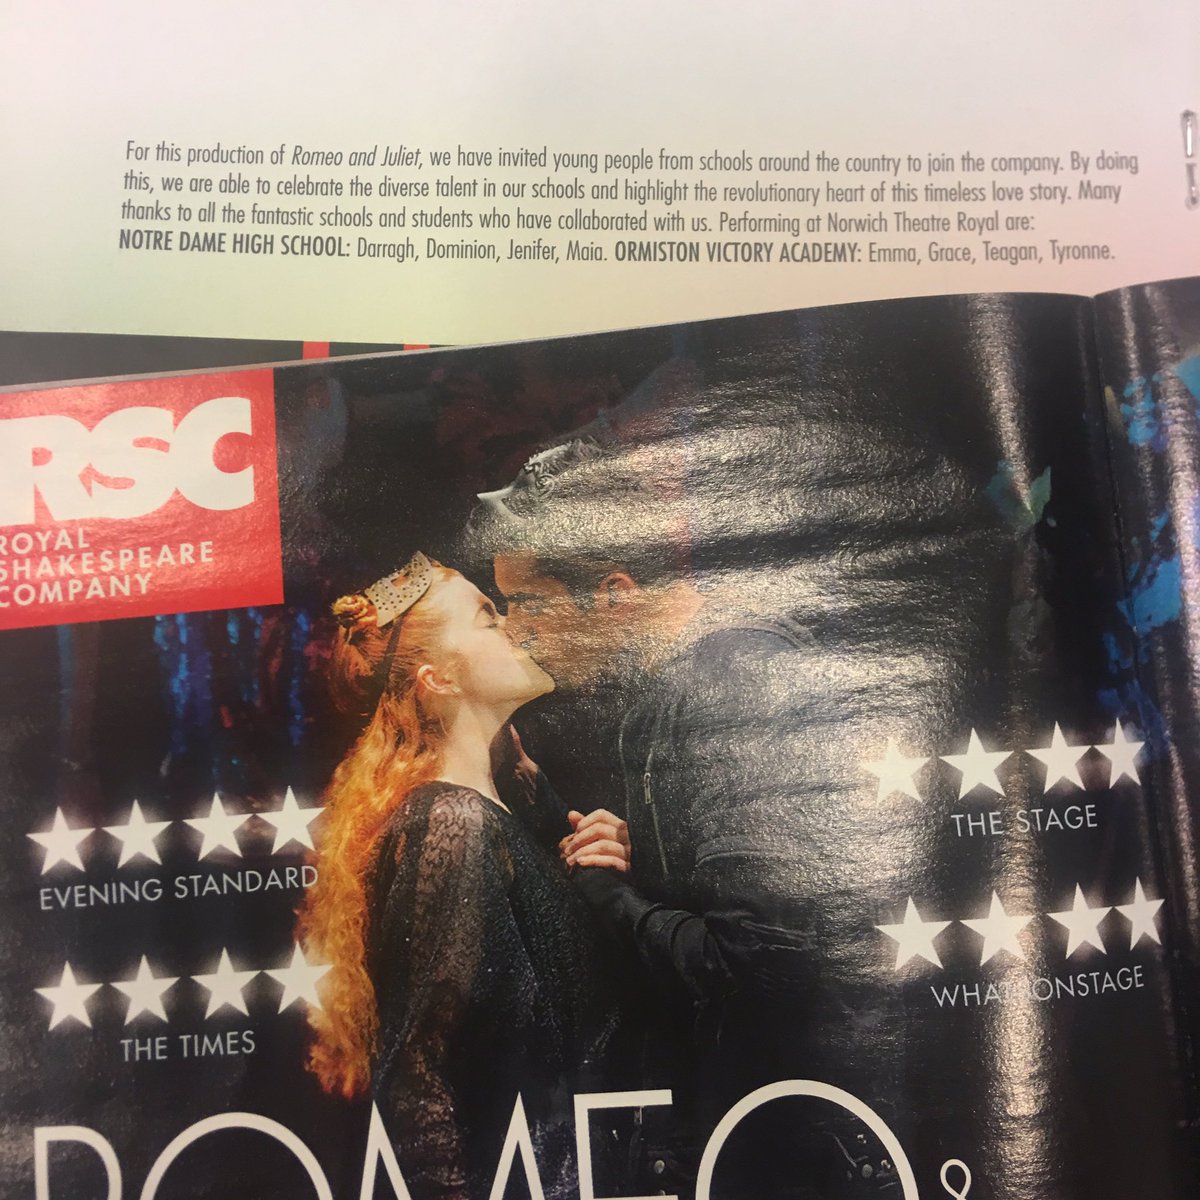 HUGE 🙌🏻 to the young people from @NDHSNorwich & @VictoryAcad appearing with @TheRSC in #RSCRomeo tonight. You are all amazing! Big thanks too to @EricaWhyman and the whole company for such supportiveness and generosity. Here’s to #ShakespeareNation 😀